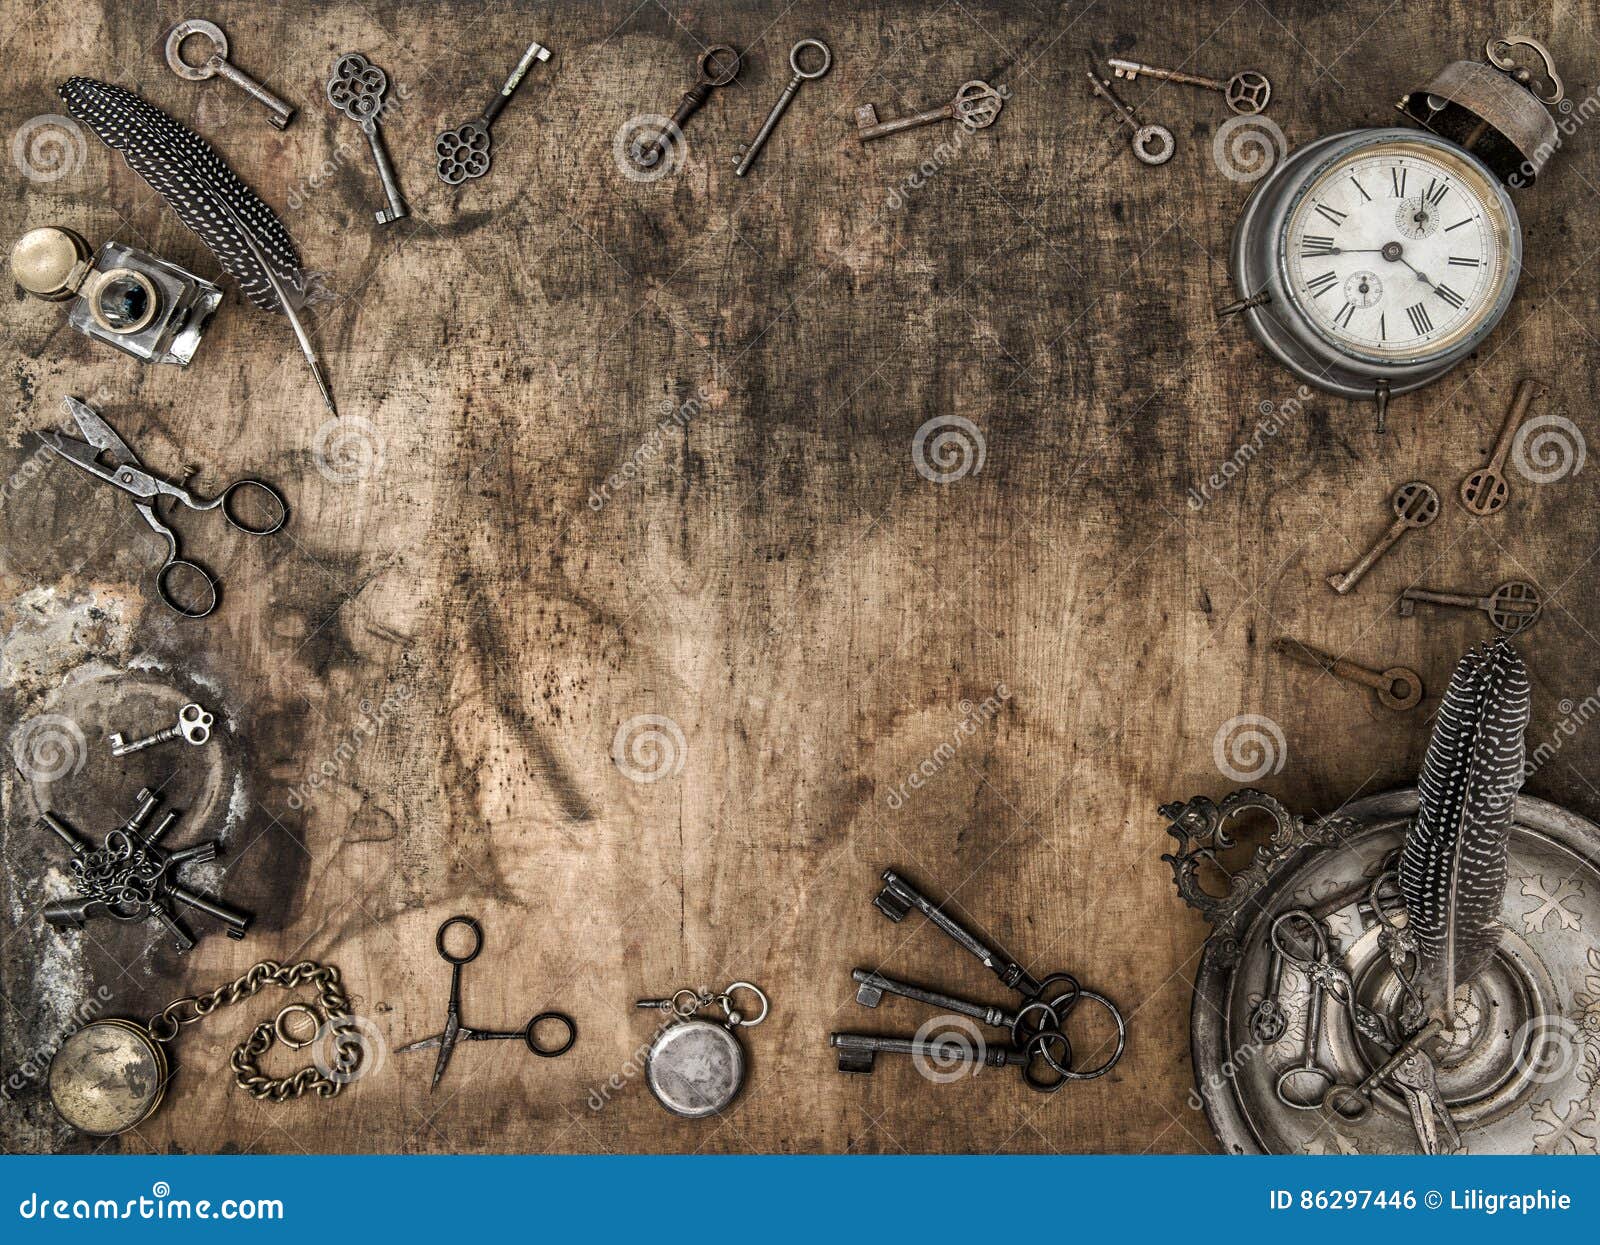 Rustic Wooden Background Vintage Office Accessories Stock Photo ...